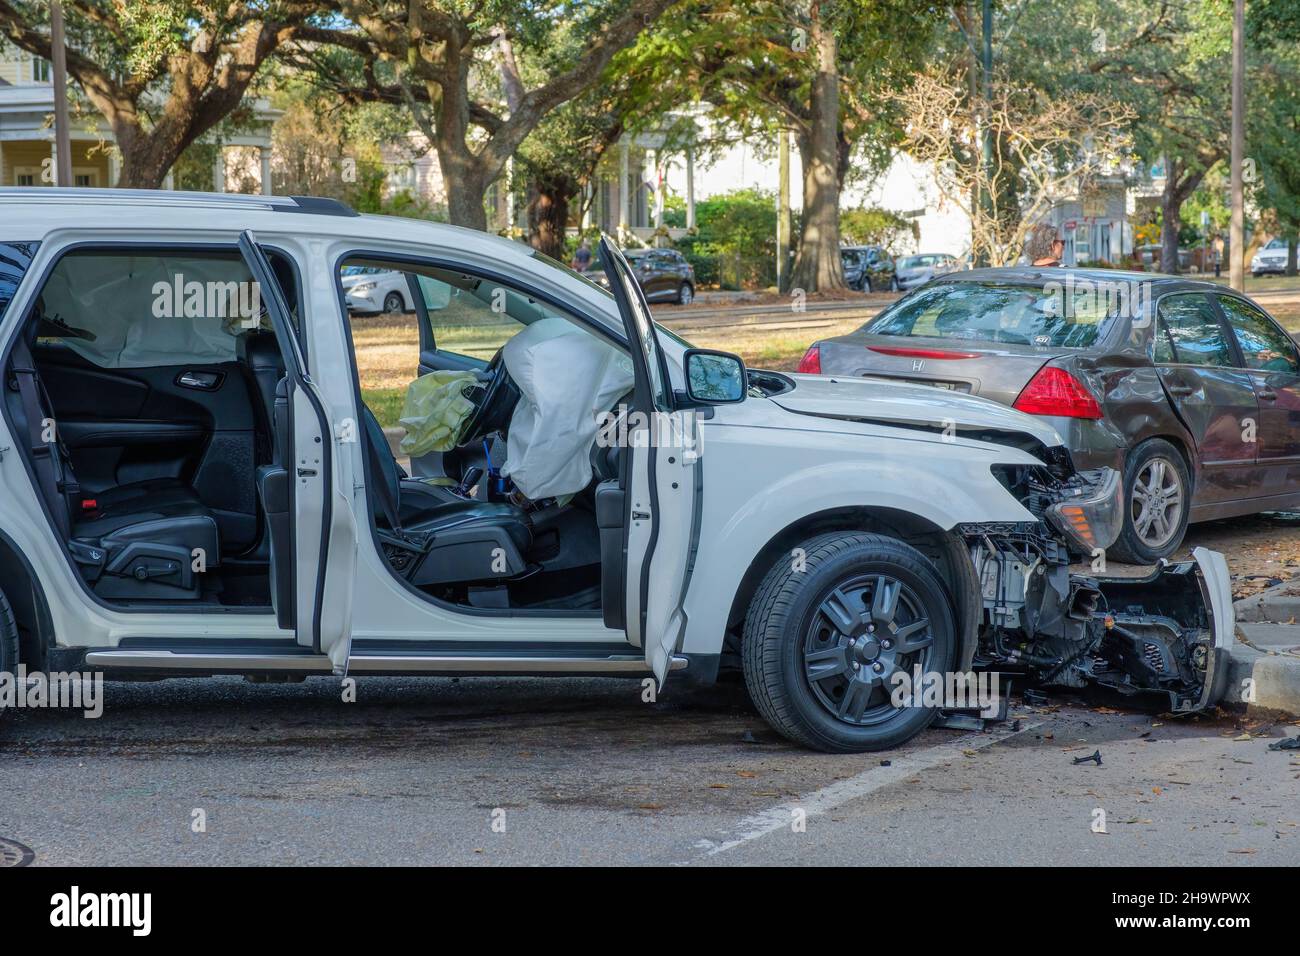 NEW ORLEANS, LA, USA - DECEMBER 5, 2021: Aftermath of a two-car collision on Carrollton Avenue showing deployed airbags Stock Photo